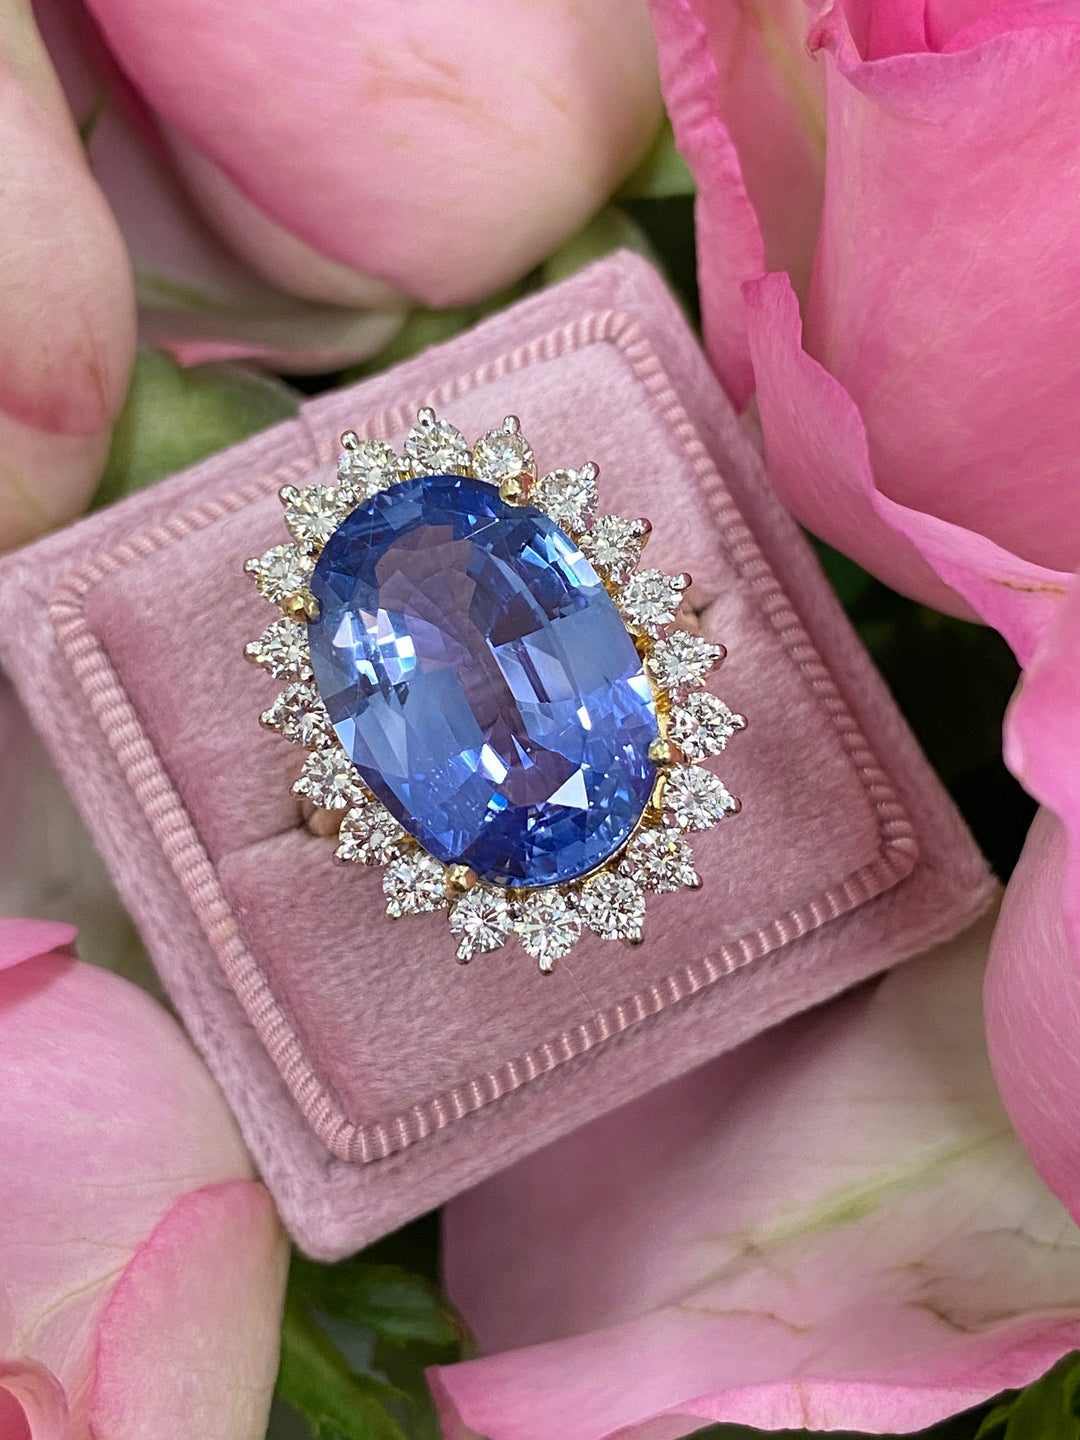 14 Carat Oval Cut Ceylon Blue Sapphire Unheated Engagement Ring in Yellow Gold Katherine James Jewellery    